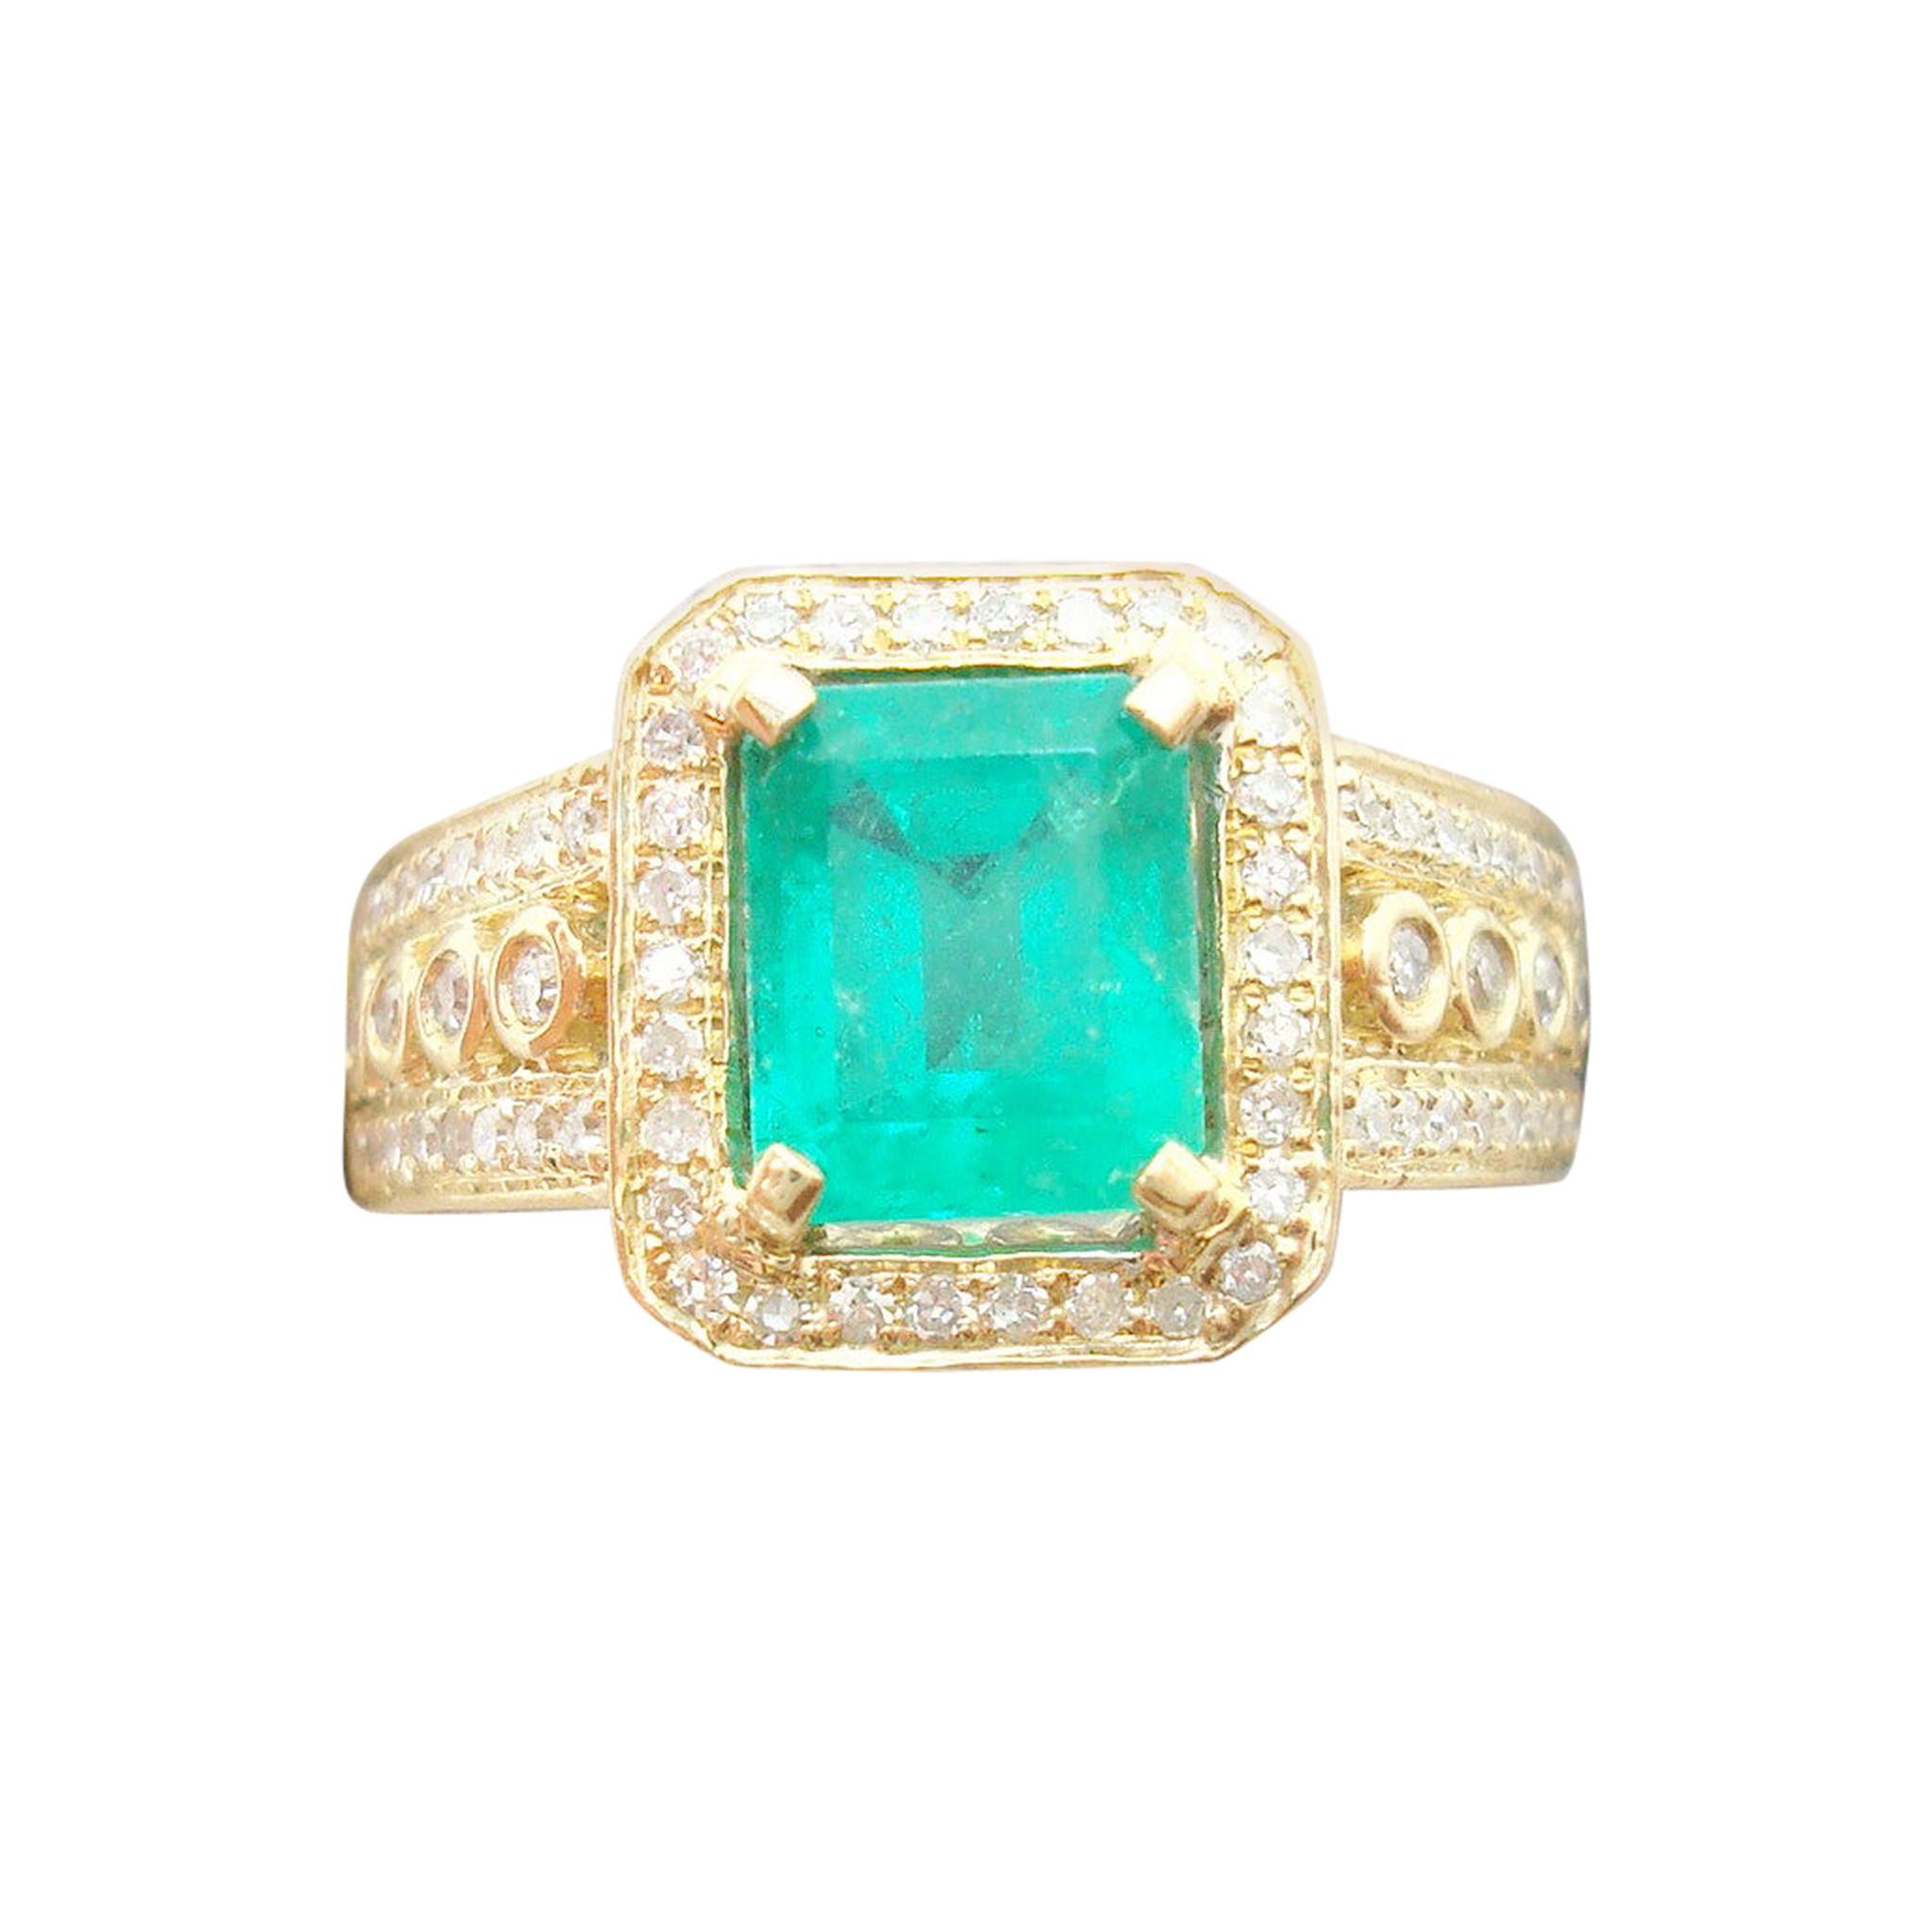 How do you tell if an emerald is real?